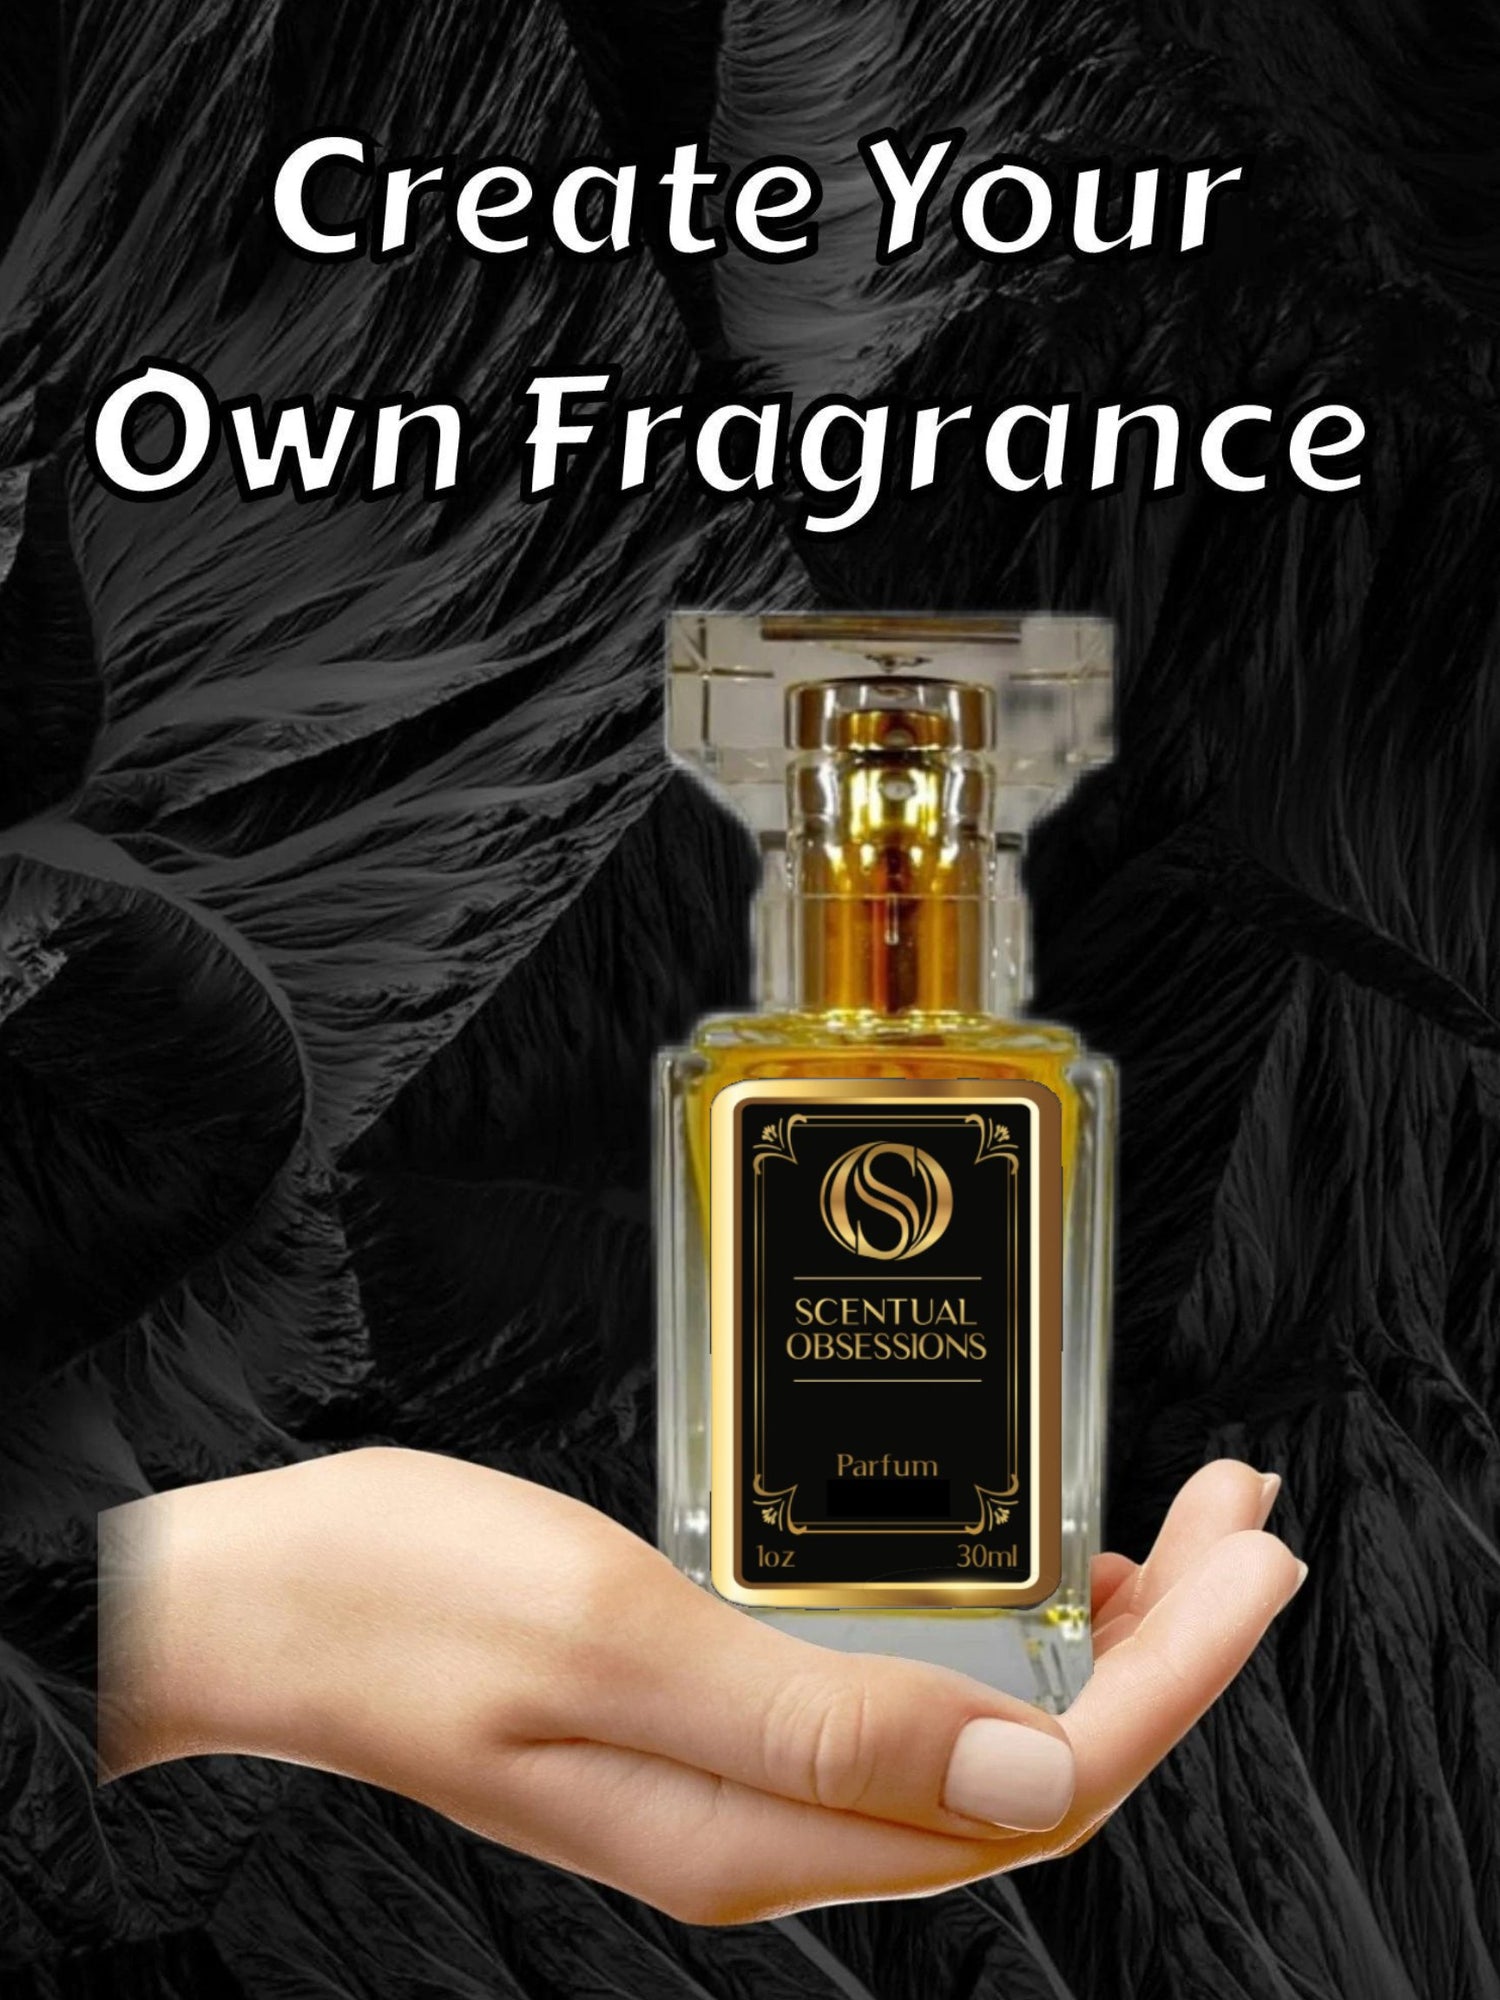 Create Your Own Fragrance